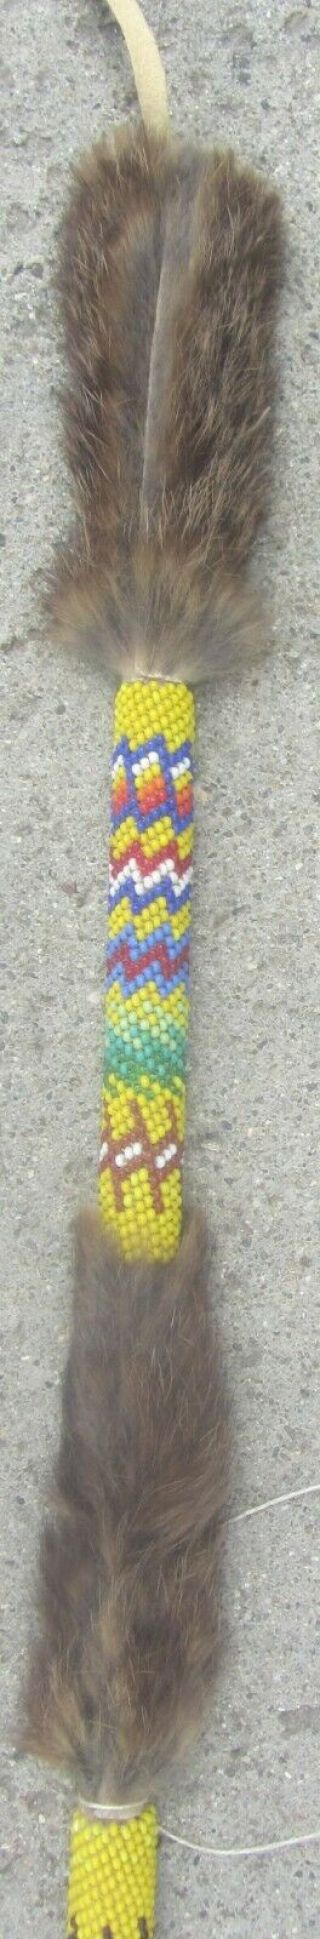 VINTAGE BEADED AND FUR NATIVE AMERICAN INDIAN DANCE DANCING STICK 2